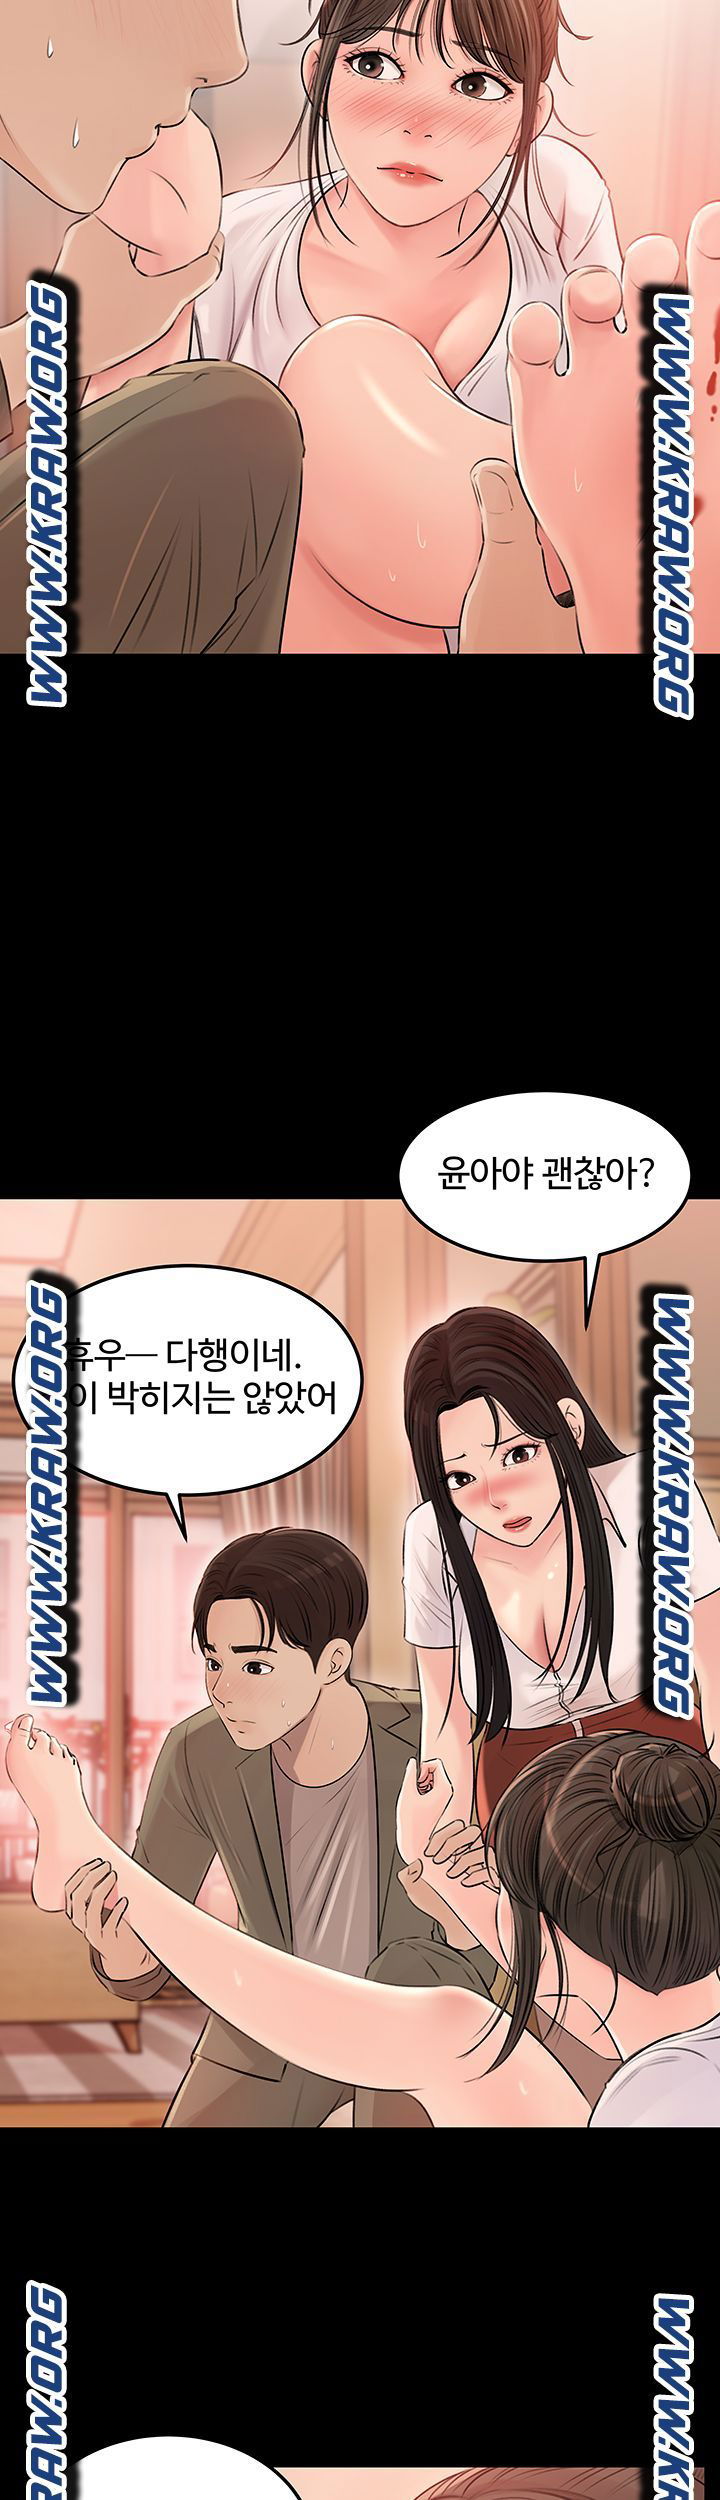 in-my-sister-in-law-raw-chap-3-19